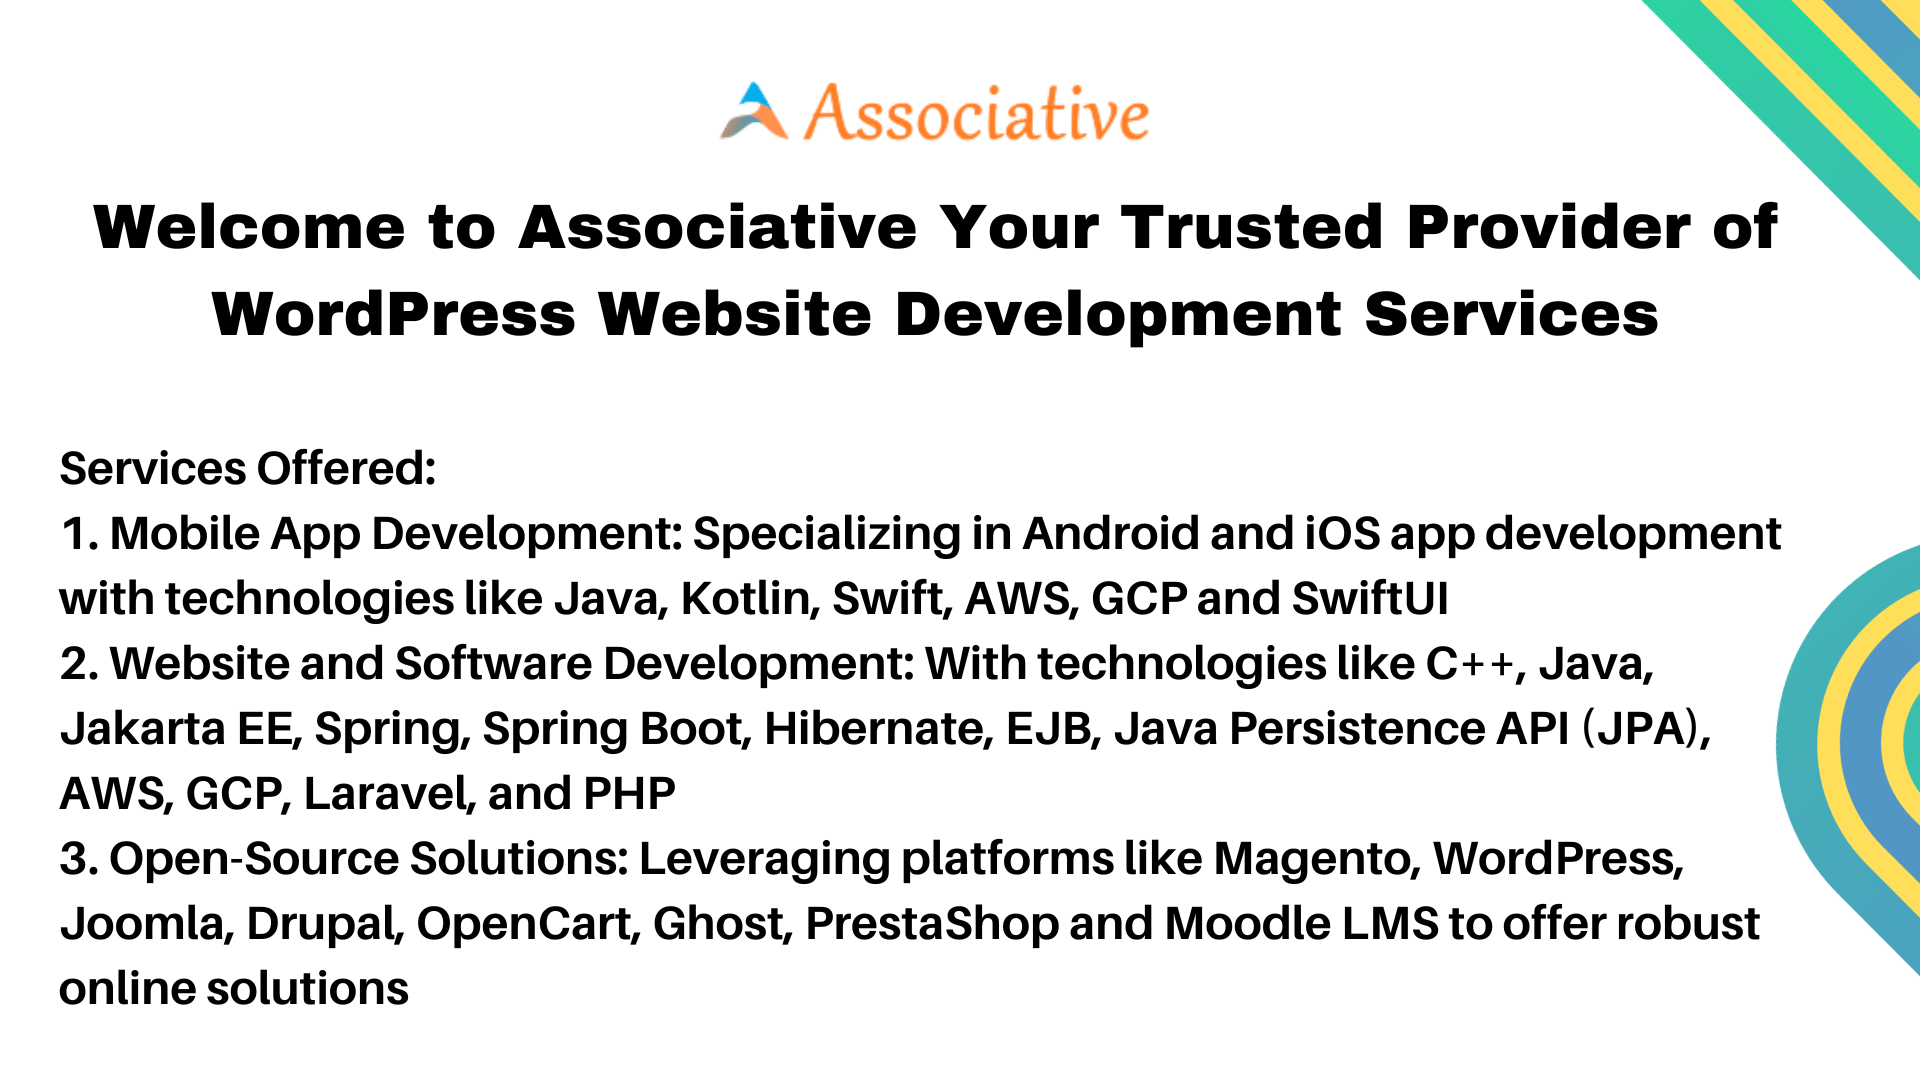 Welcome to Associative Your Trusted Provider of WordPress Website Development Services